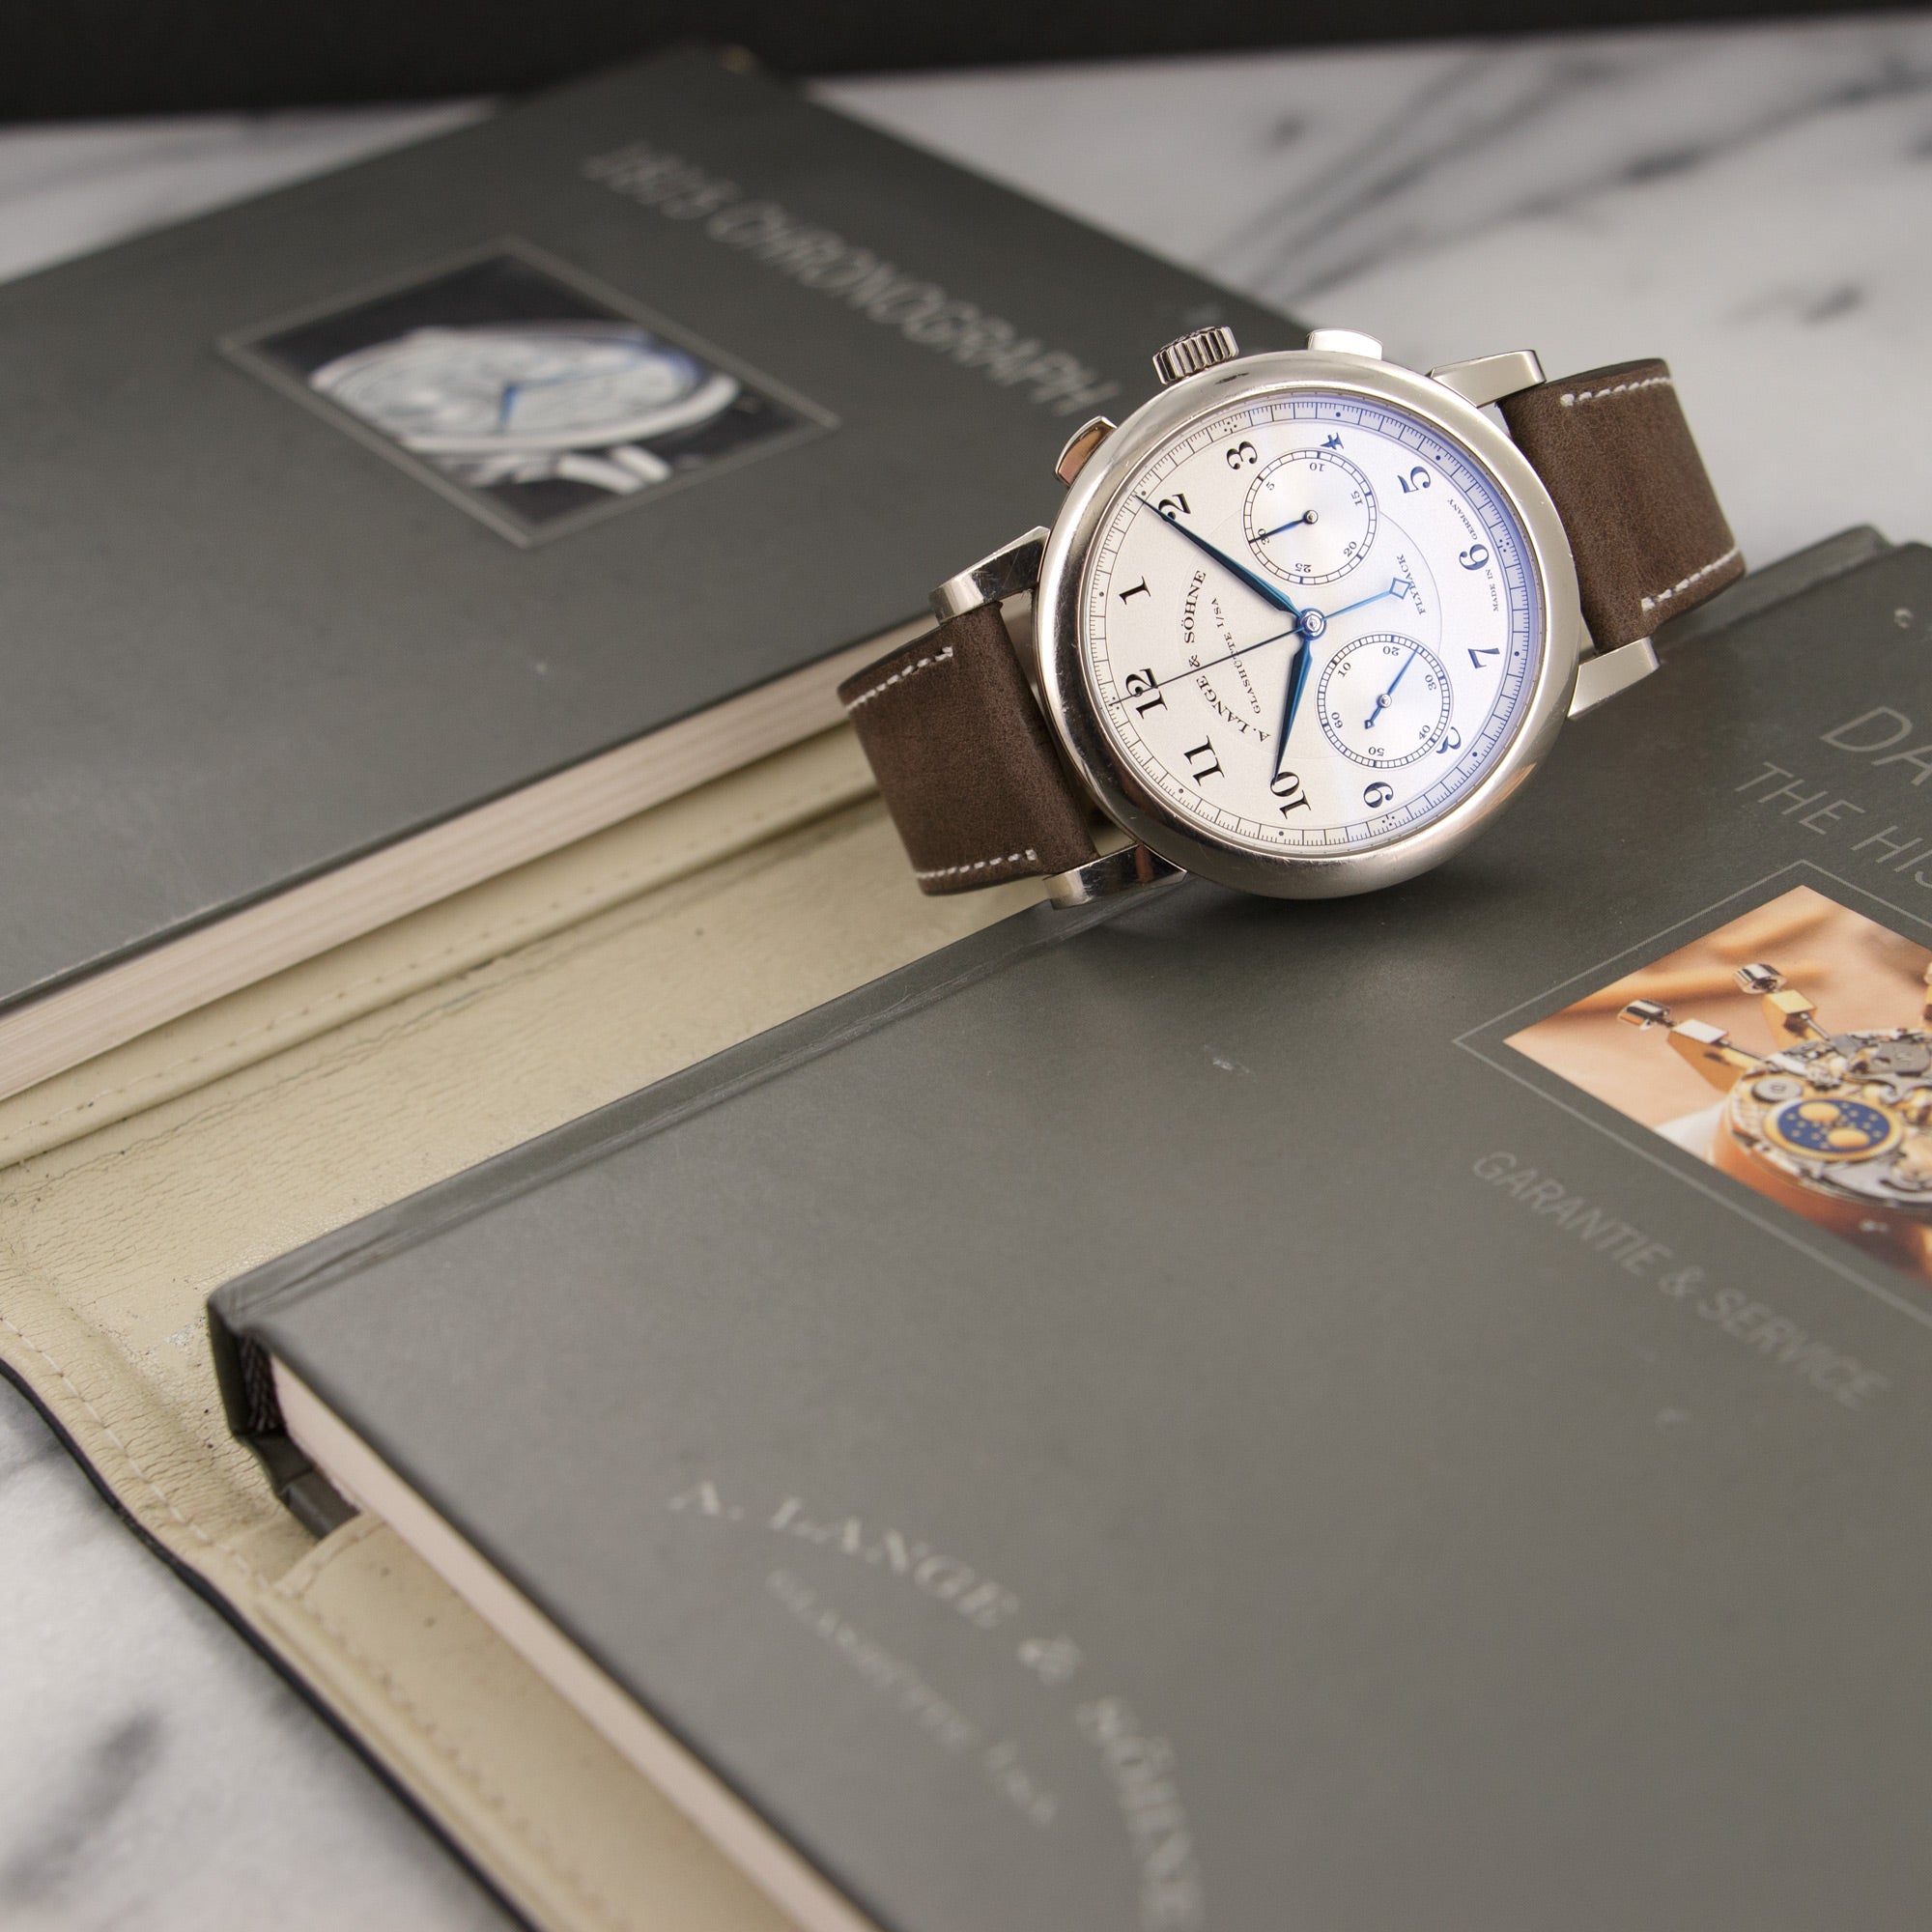 A. Lange &amp; Sohne - A. Lange &amp; Sohne White Gold 1815 Chronograph Watch 402.026 - The Keystone Watches